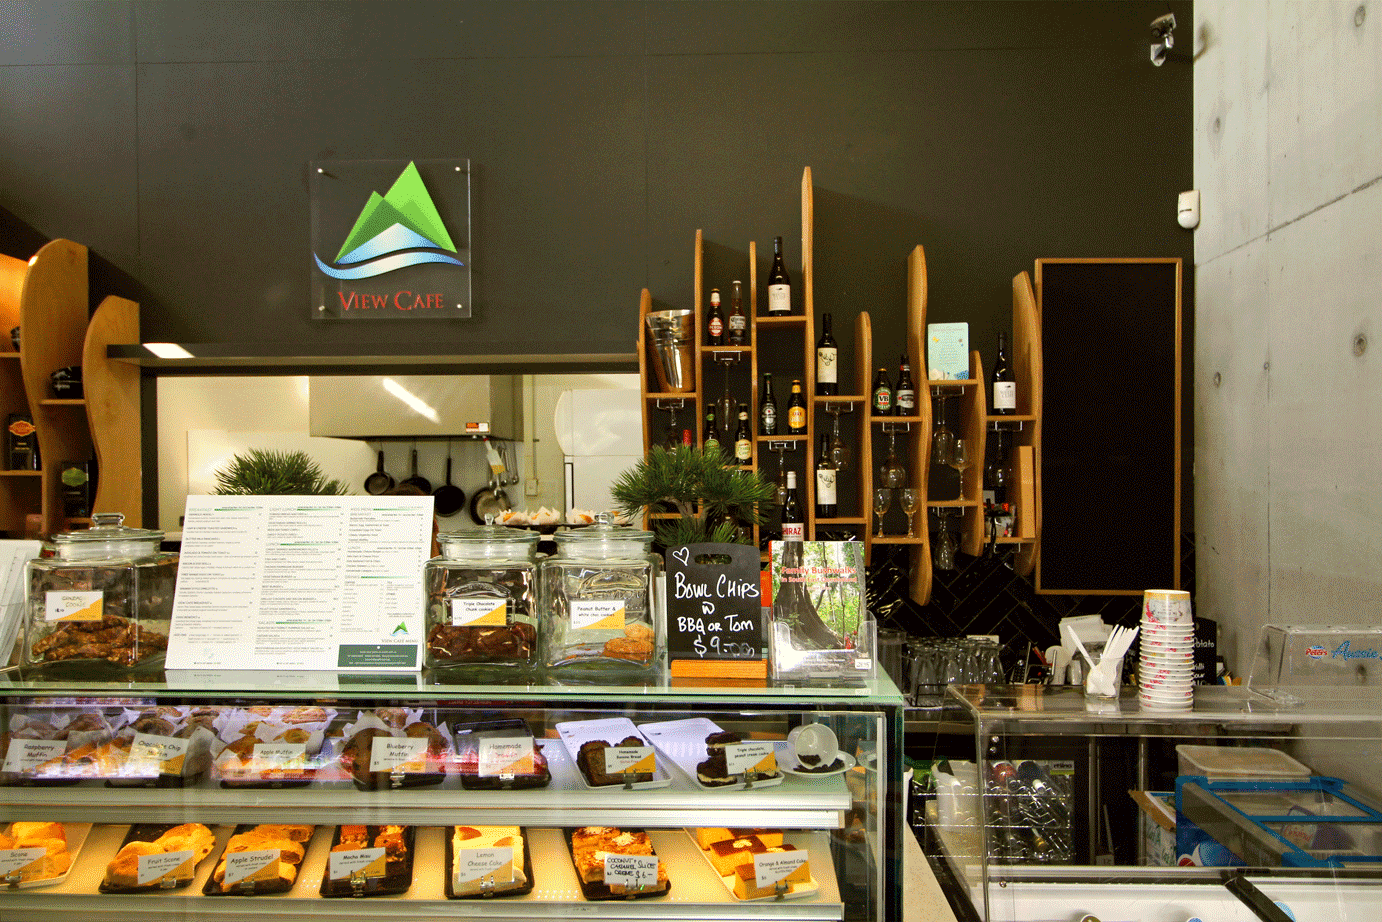 An inviting cafe display case showcasing a delightful array of pastries and cakes, exuding a serene and peaceful ambiance in a vibrant, urban setting.